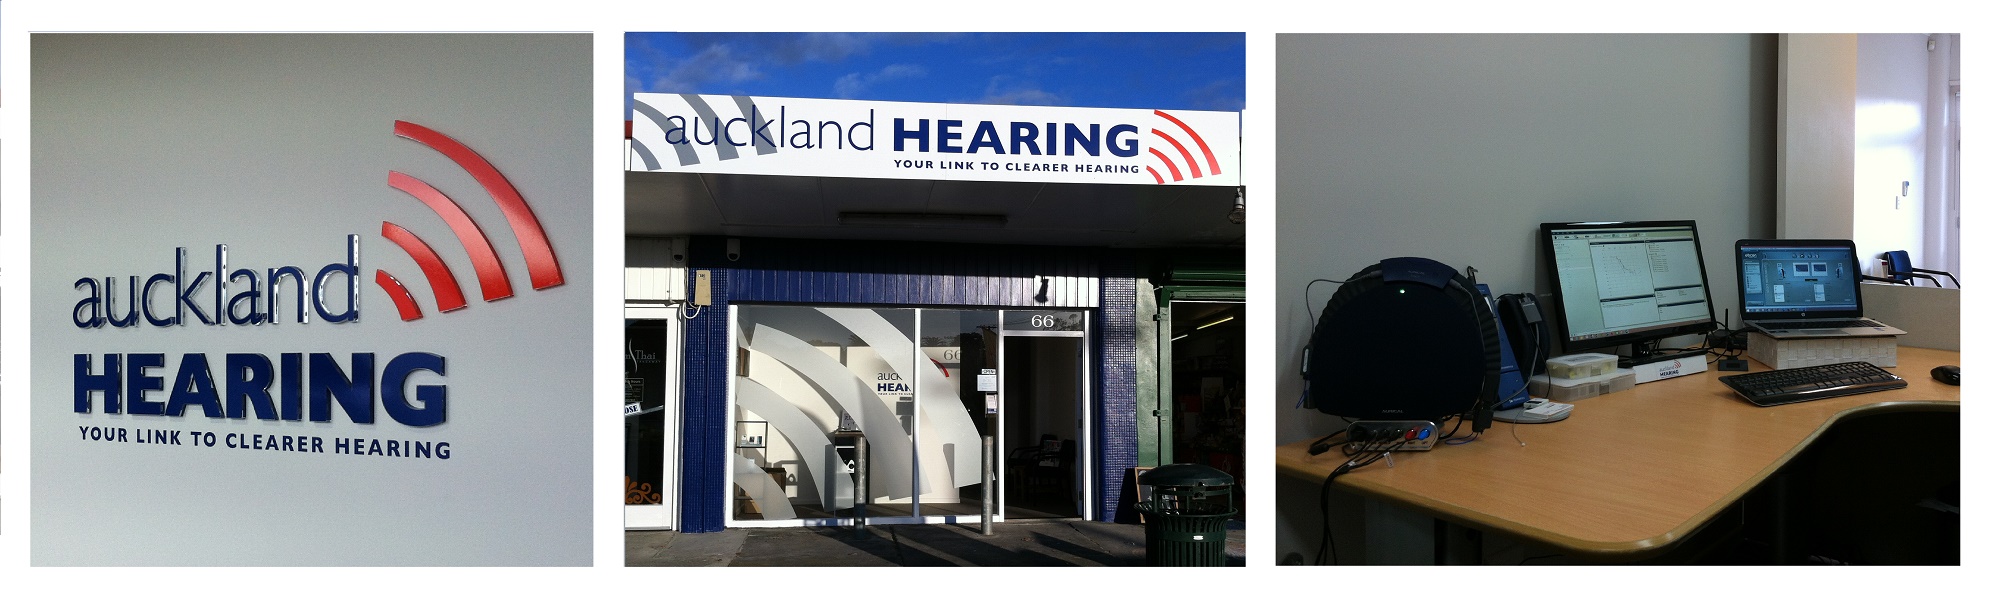 Our quiet hearing clinic